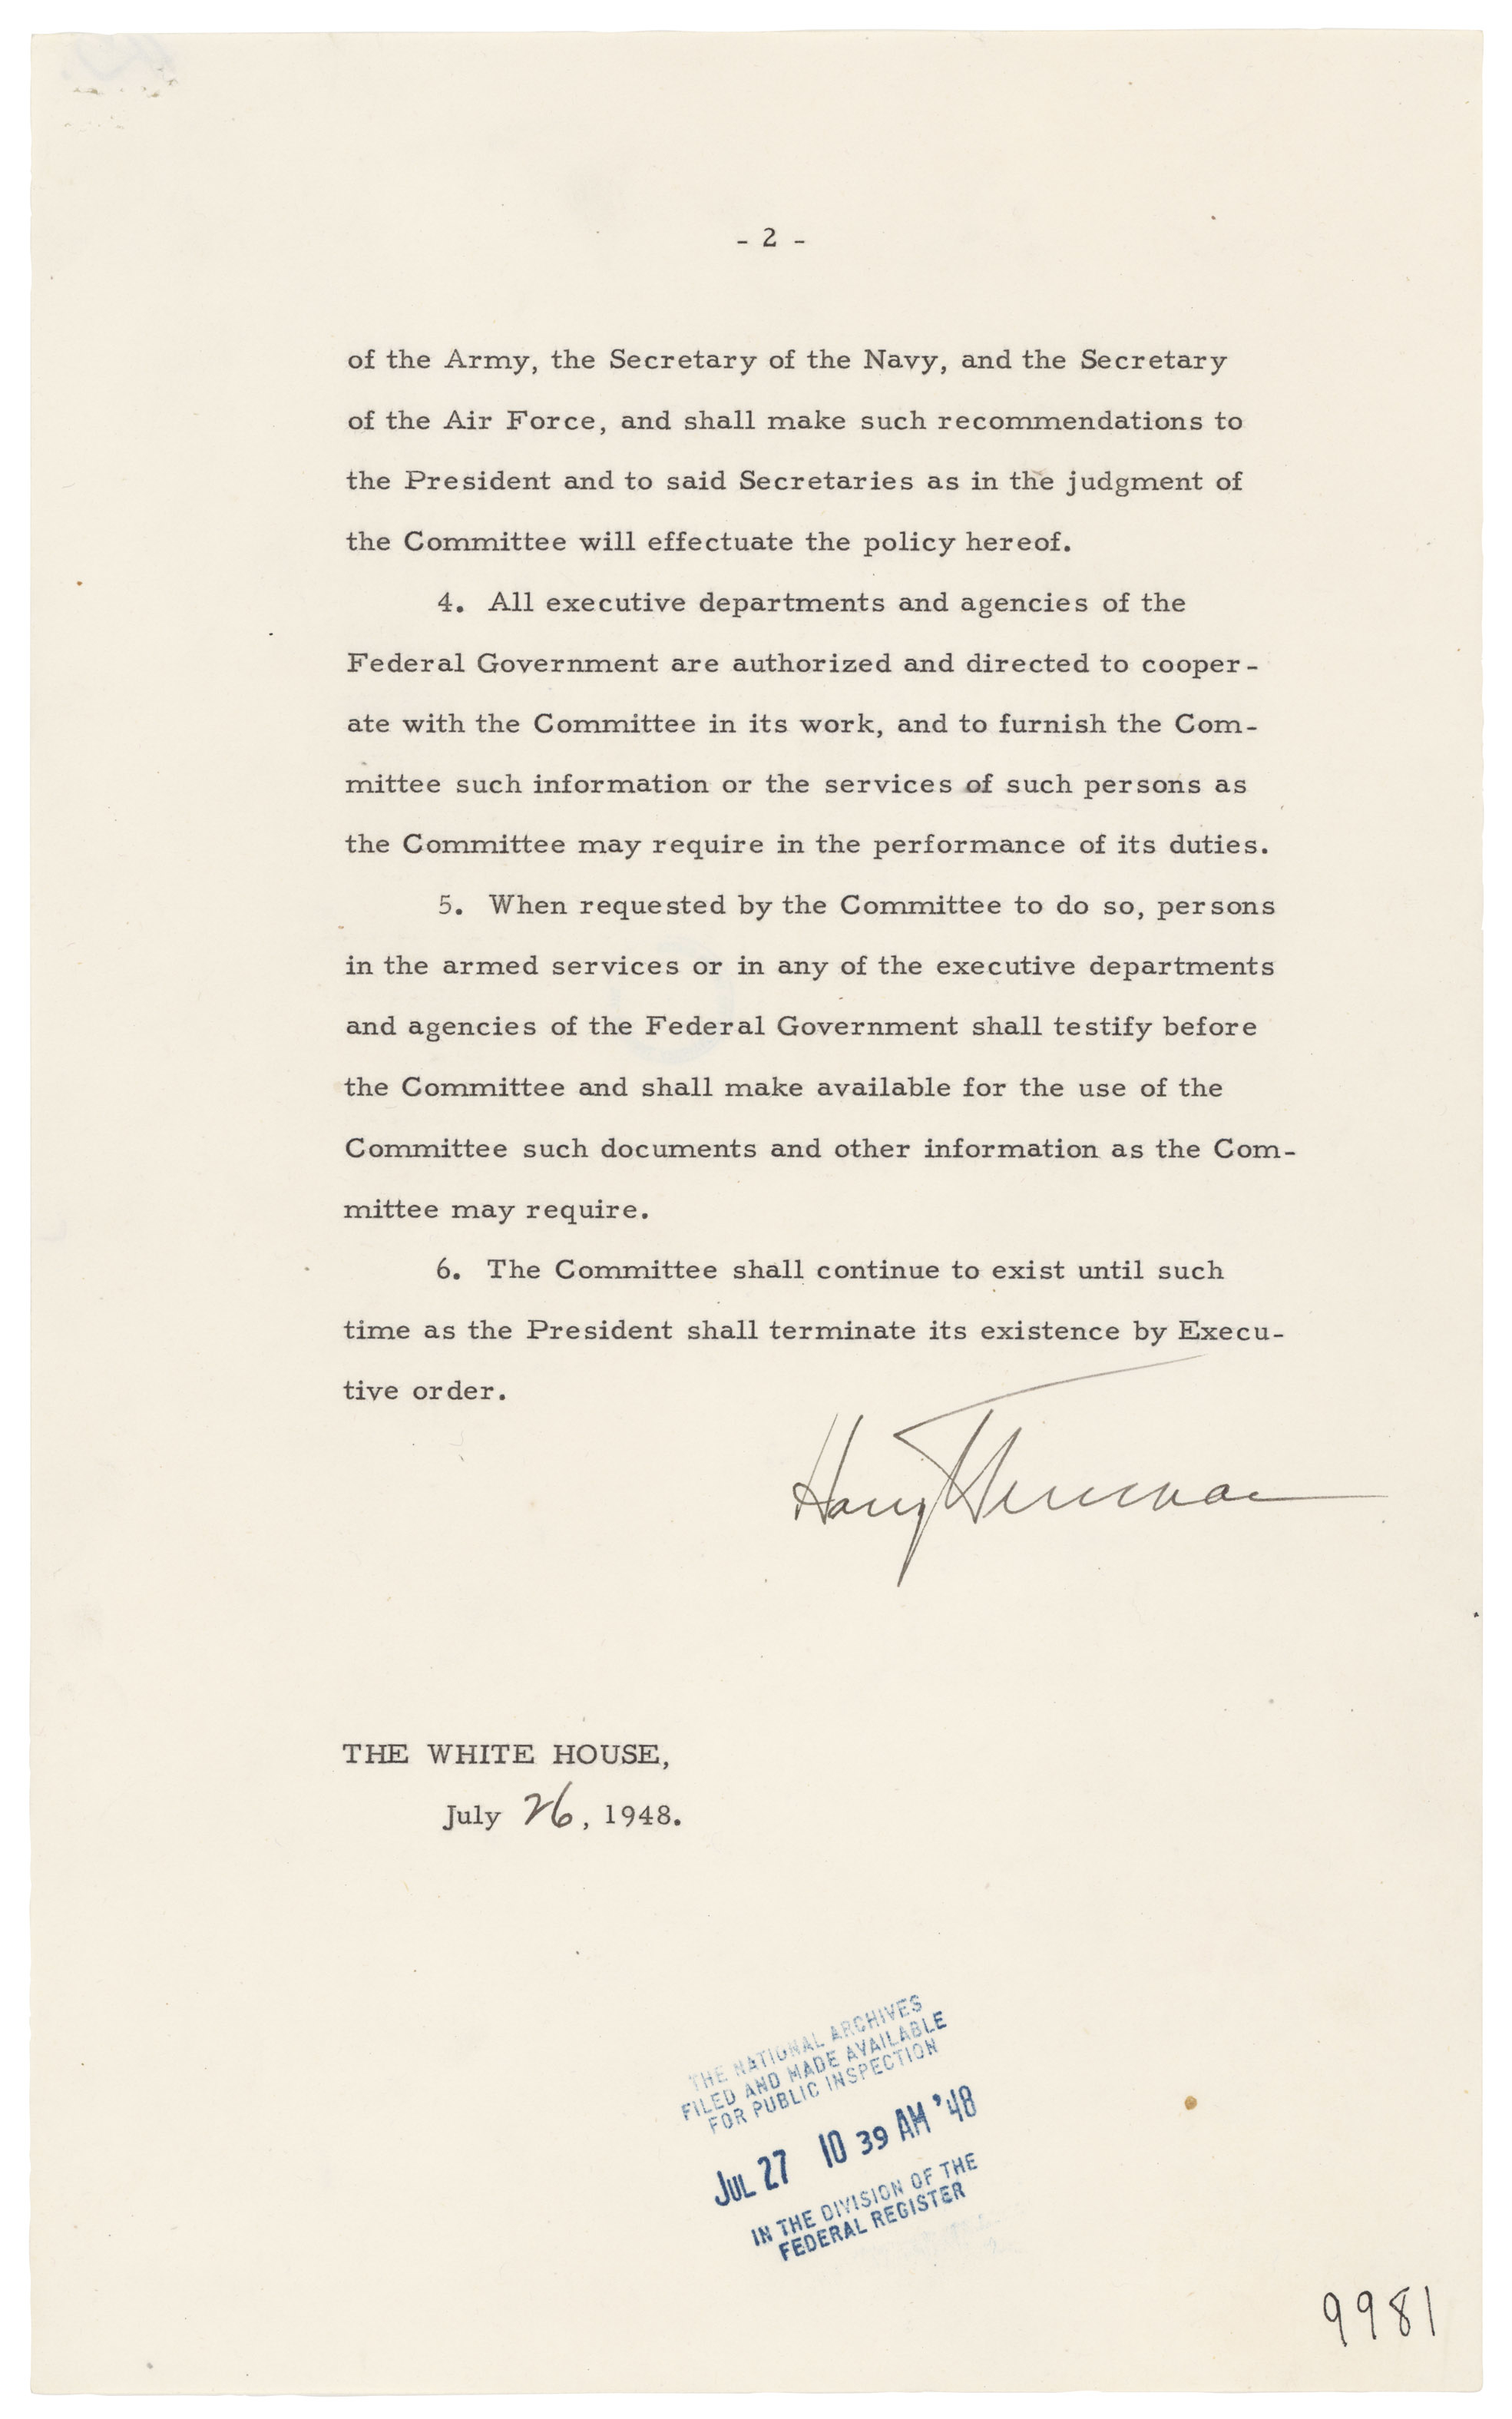 Executive Order 9981 dated July 26, 1948